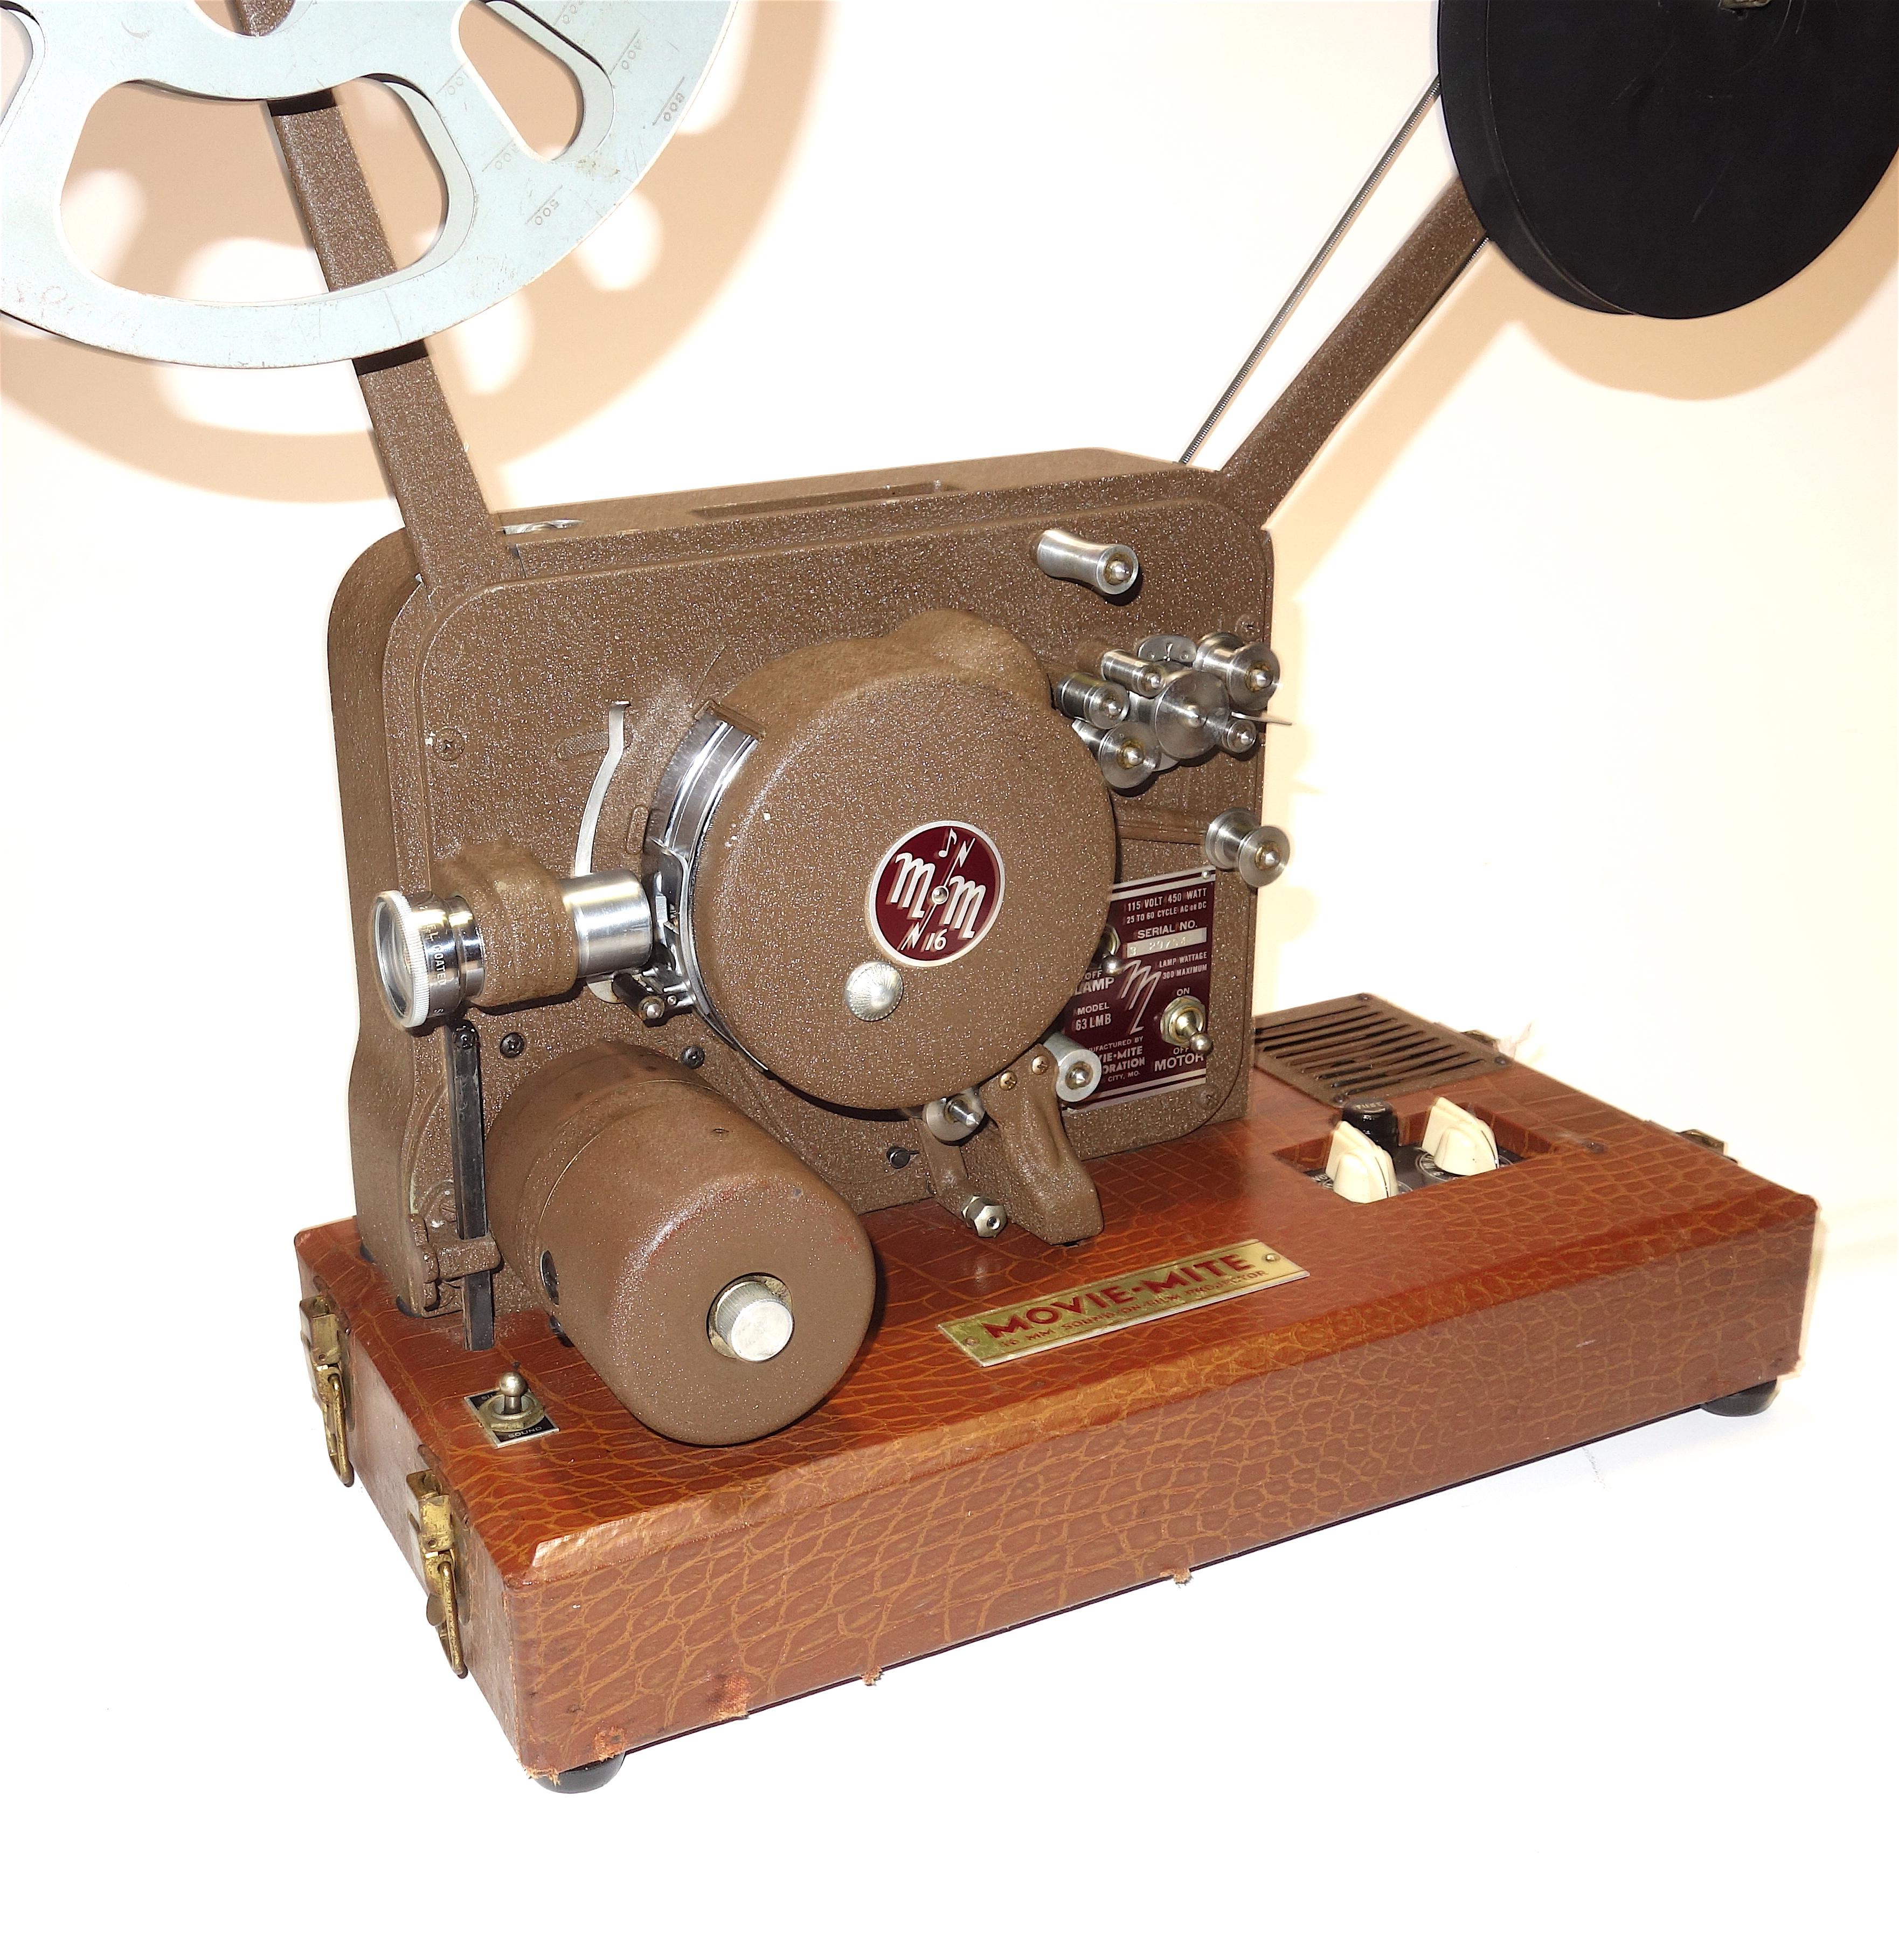 Submitted for your careful consideration is this circa 1940s Movie-Mite 16mm sound on film projector.
This hard to find item is in spectacular original cosmetic condition with original factory paint finish in pristine condition and the original